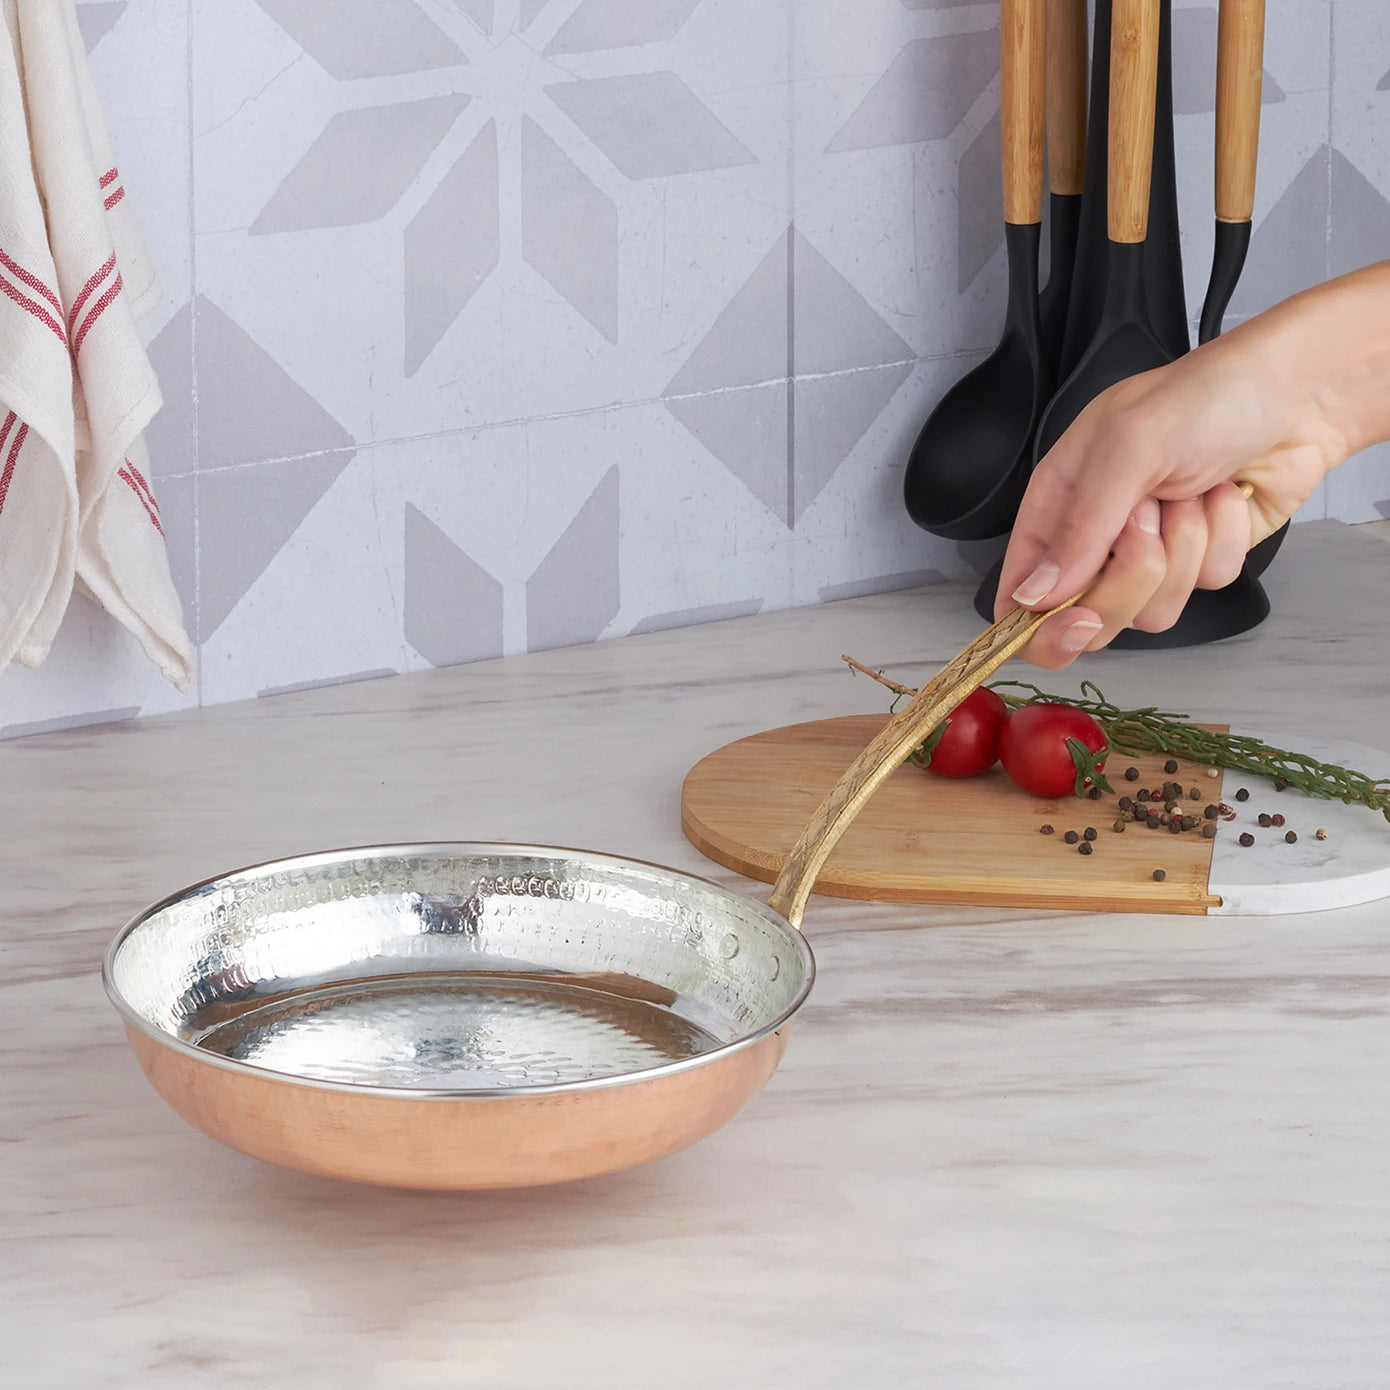 Exquisite handmade frying copper pan for exceptional cooking experience